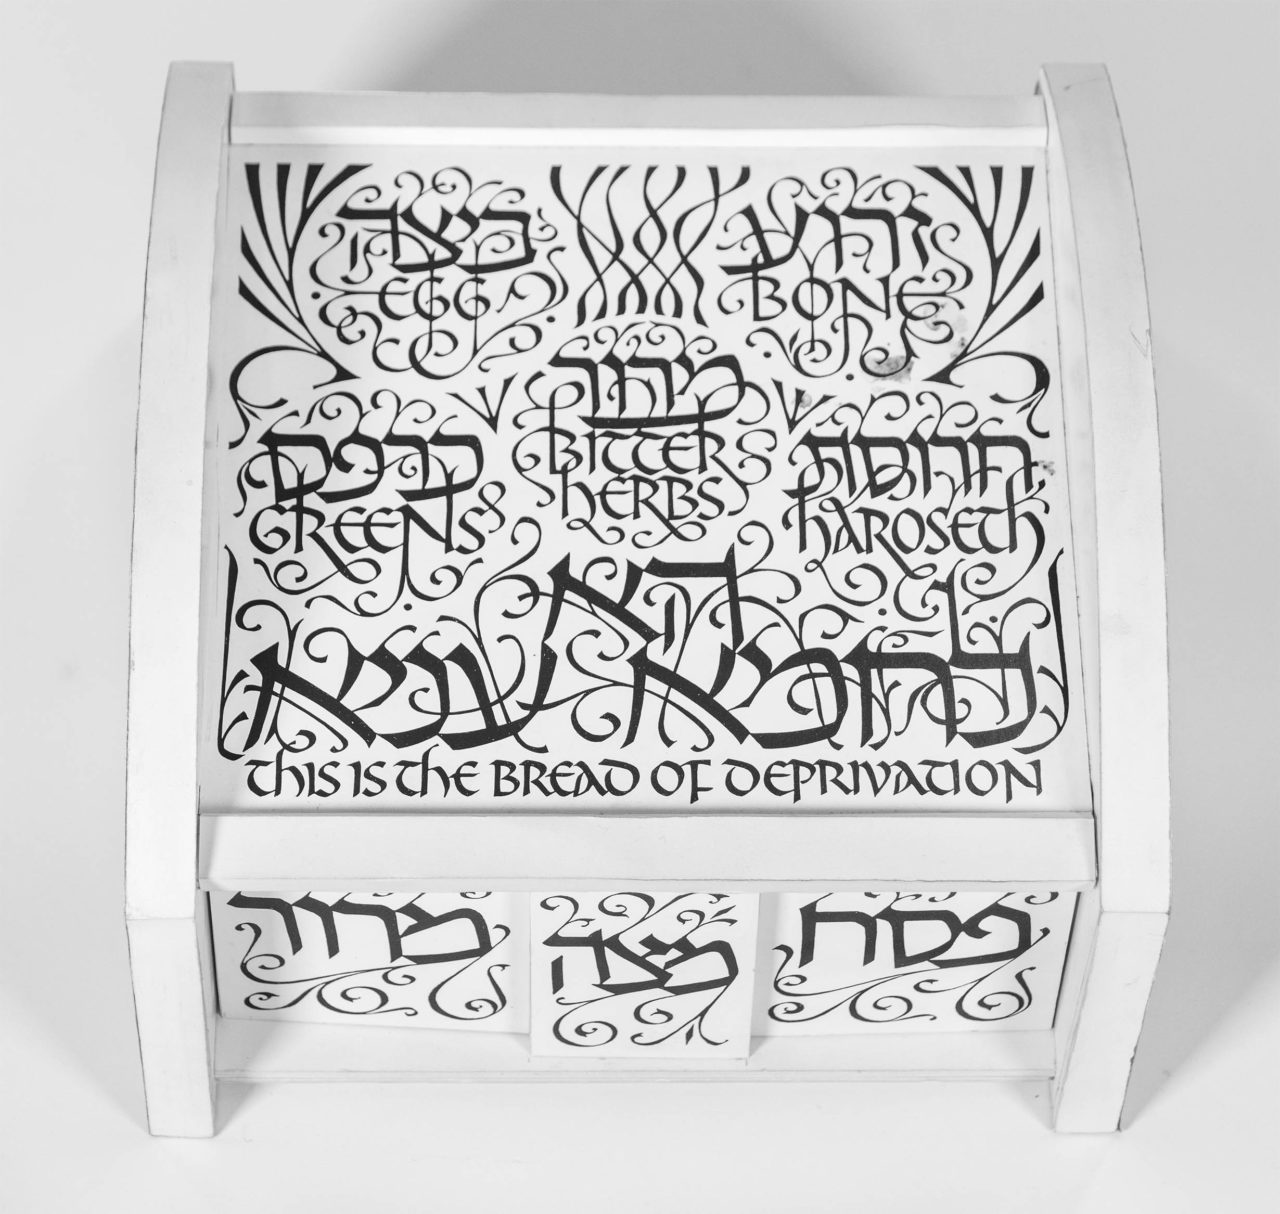 Model for a seder plate